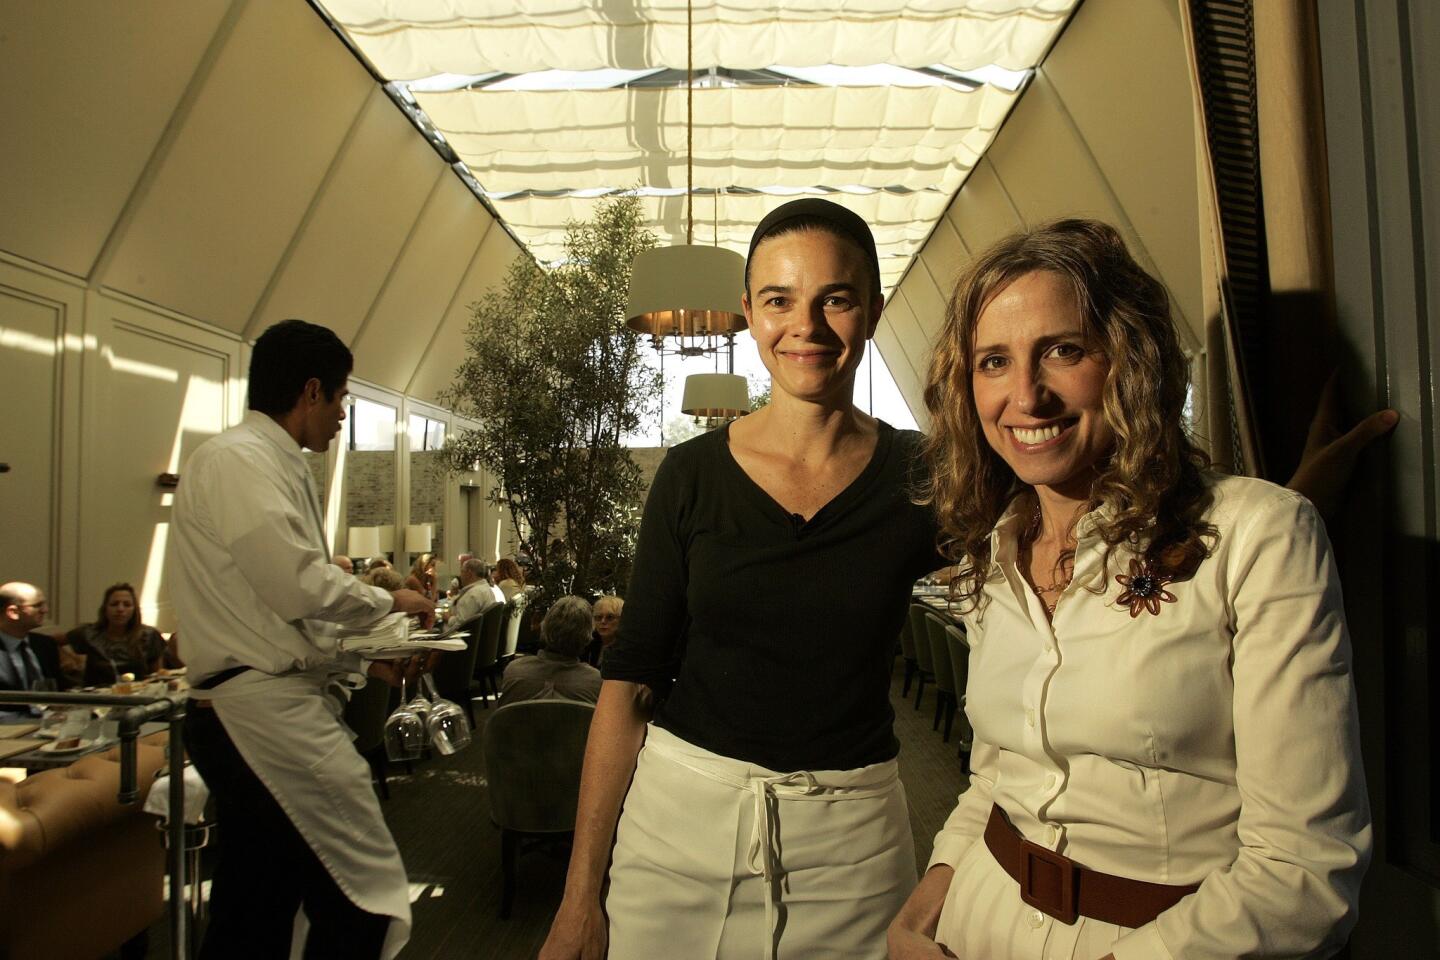 Chef Suzanne Goin, left, and wine director Caroline Styne, co-owners of Tavern Restaurant in Brentwood and Lucques. Goin is nominated for outstanding chef and Styne is nominated for outstanding restaurateur.